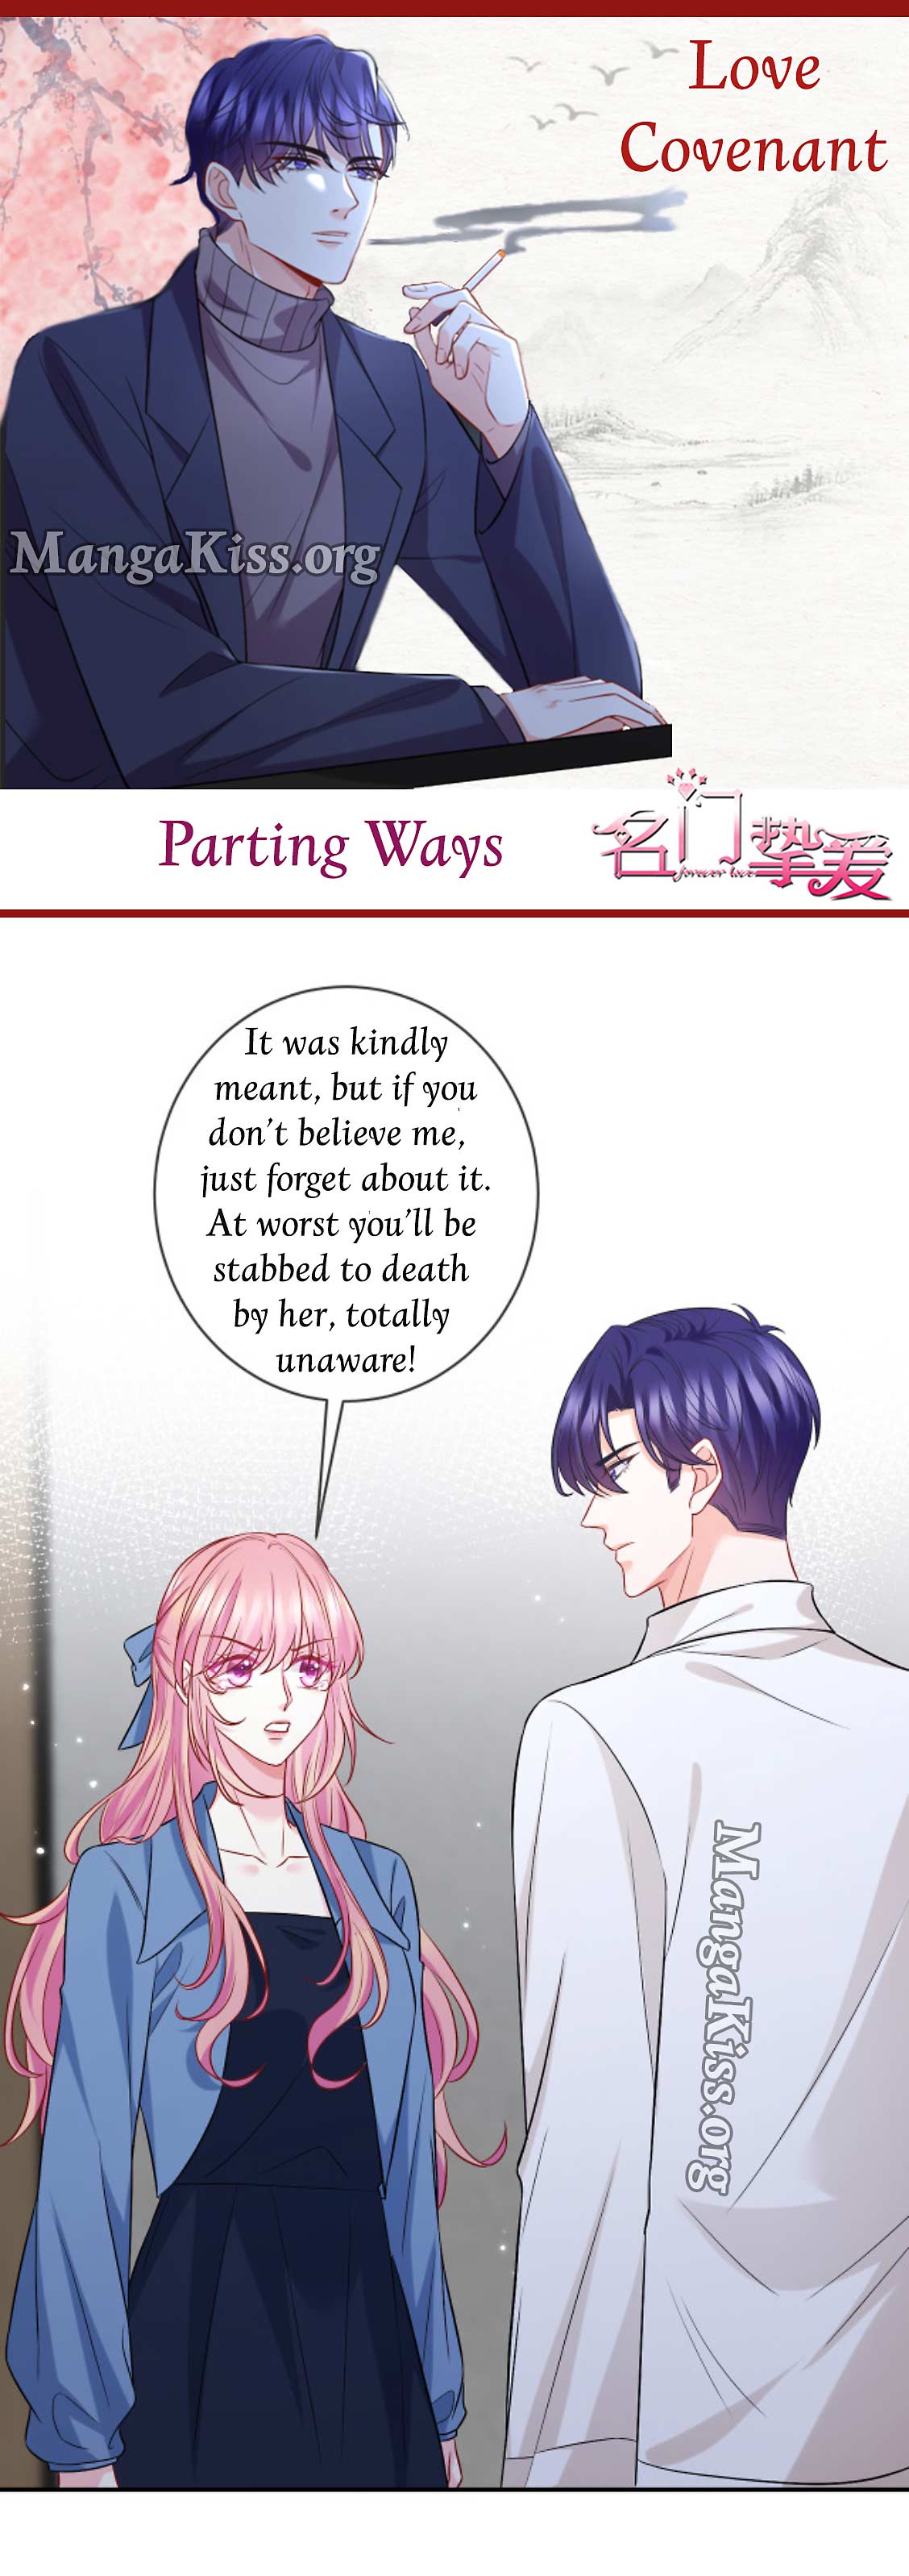 The Wife Contract And Love Covenants, MANGA68